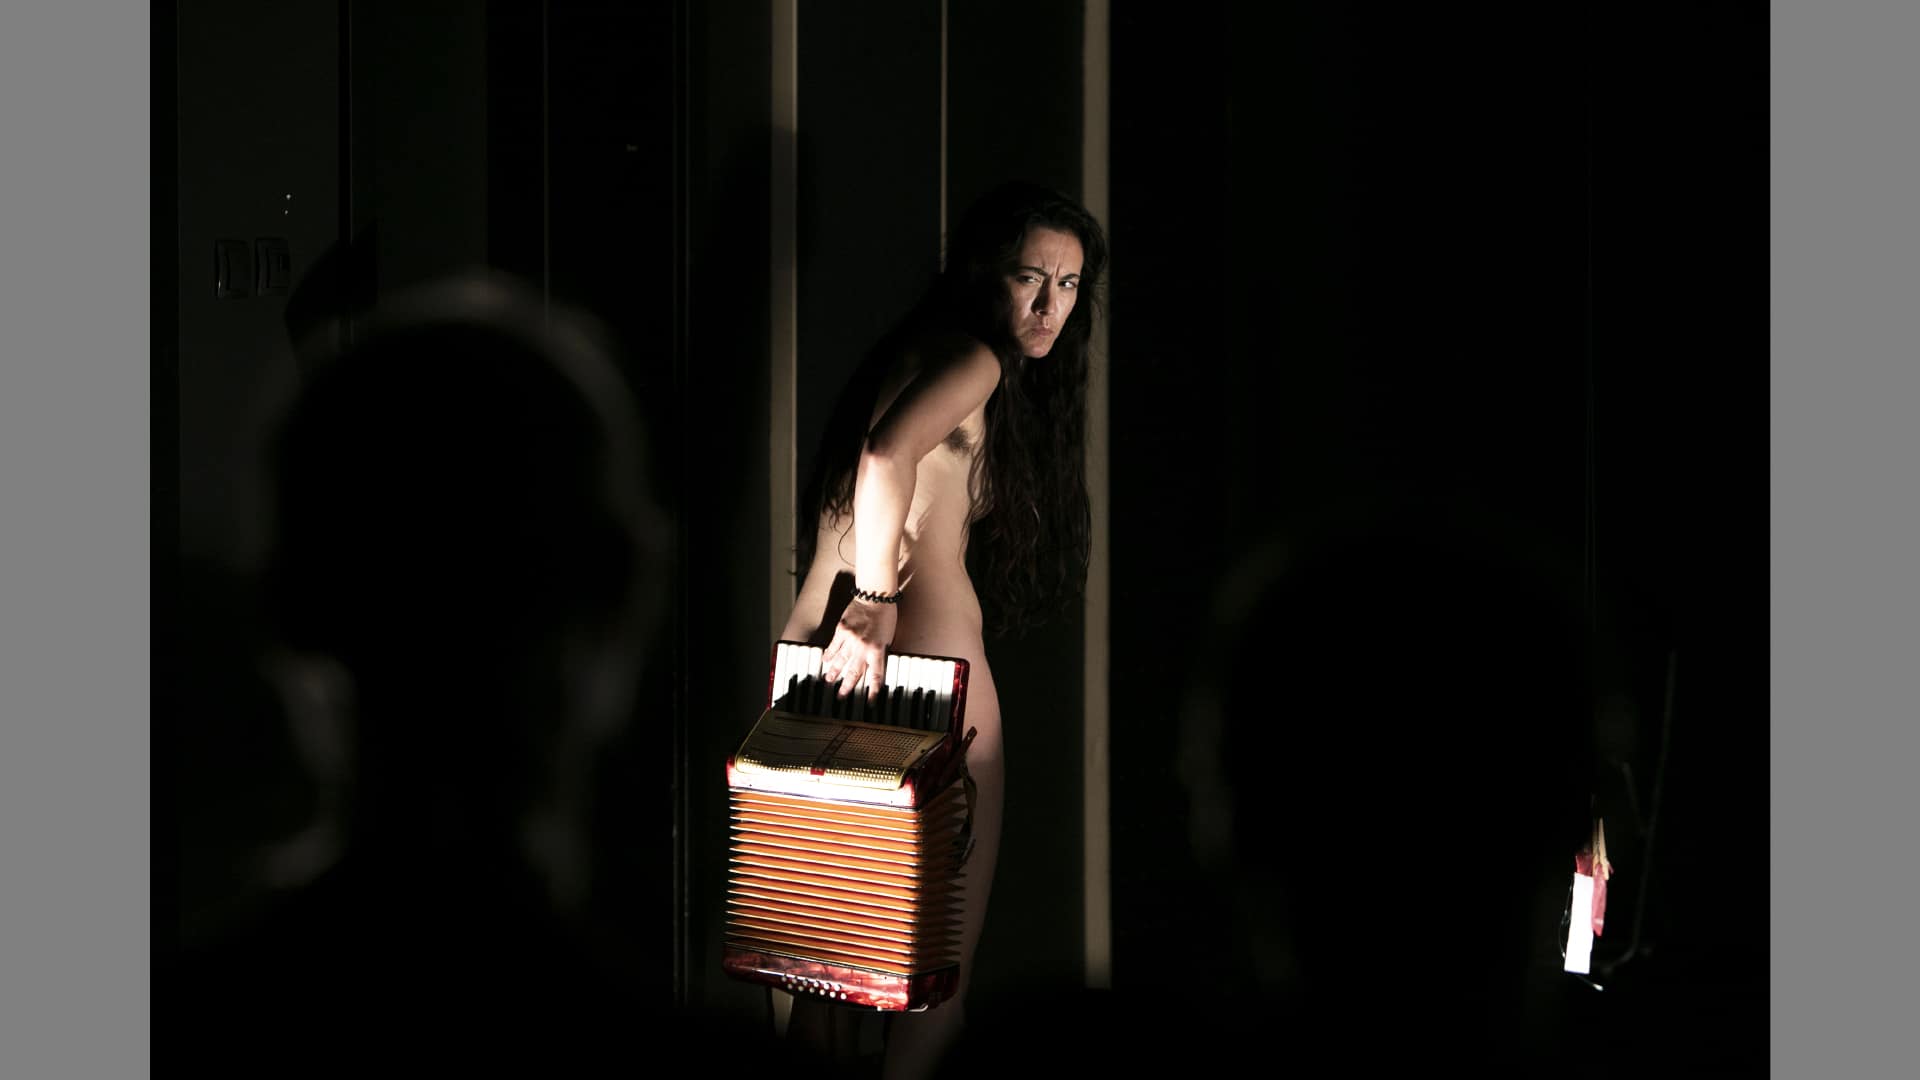 Eloina hides her naked num with an accordian